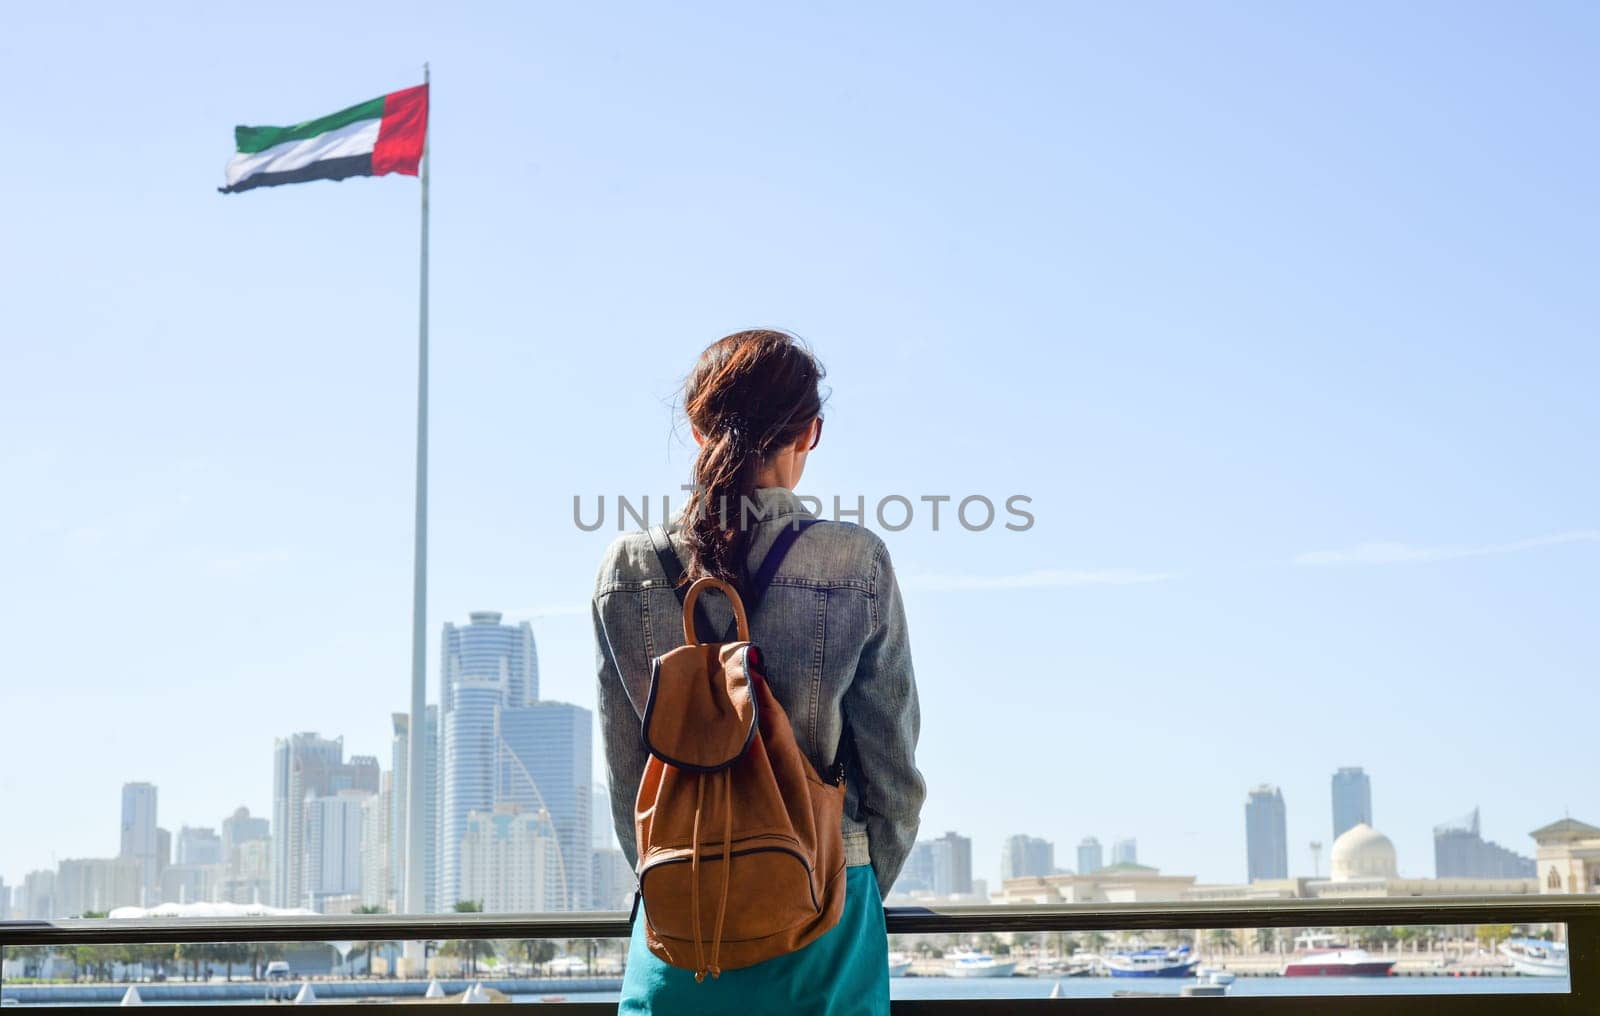 A tourist woman with a backpack admires the cityscape of Flag Island, Sharjah. Rear view of a woman on the embankment and the UAE flag